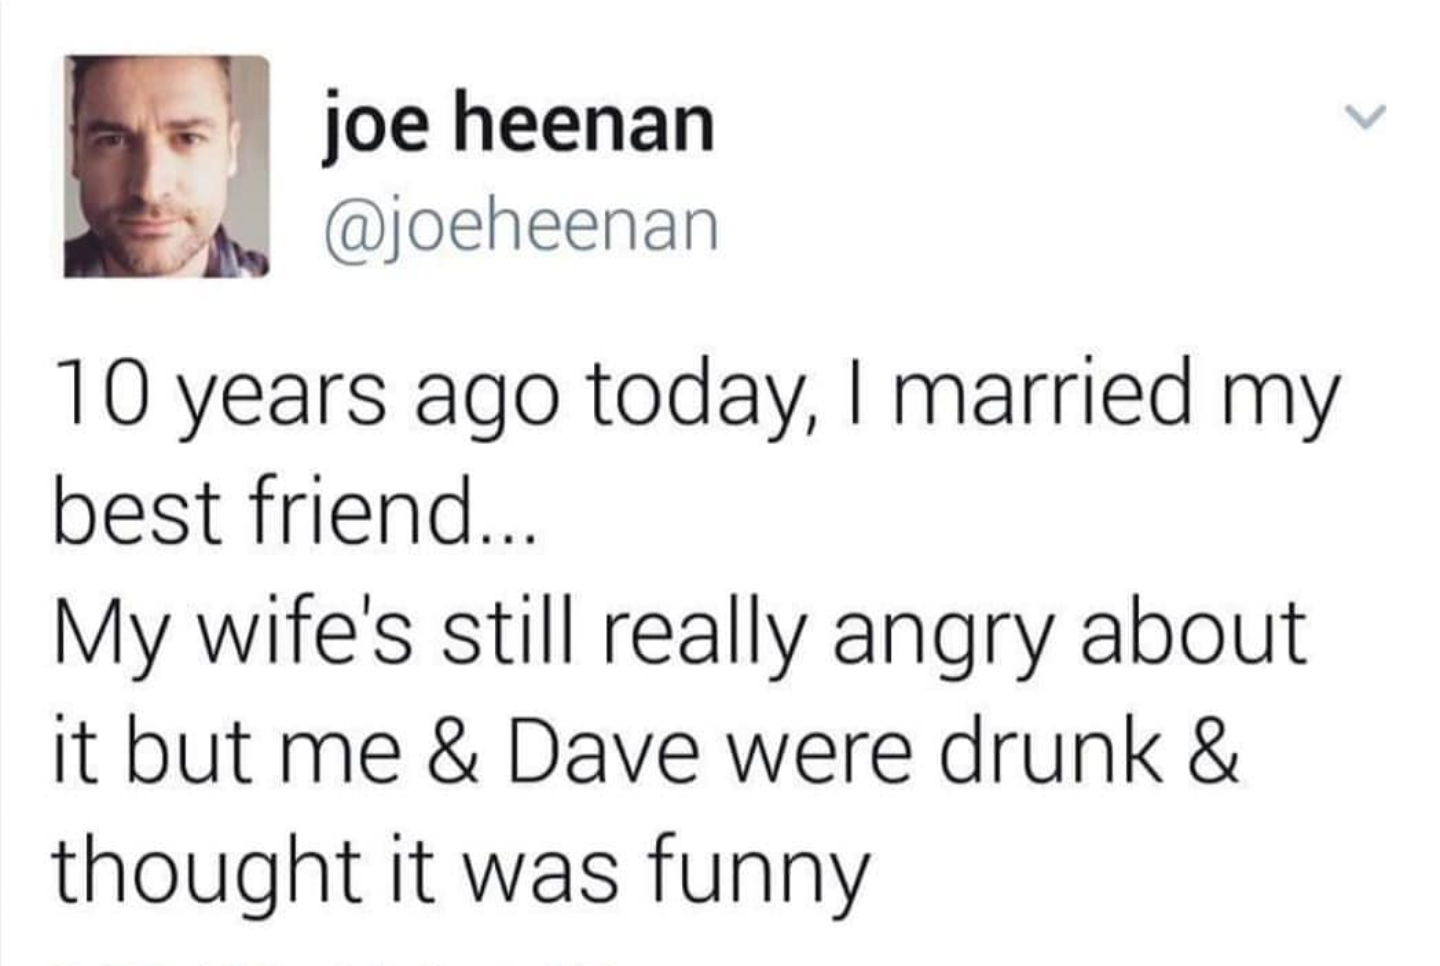 memes - smile - joe heenan 10 years ago today, I married my best friend... My wife's still really angry about it but me & Dave were drunk & thought it was funny